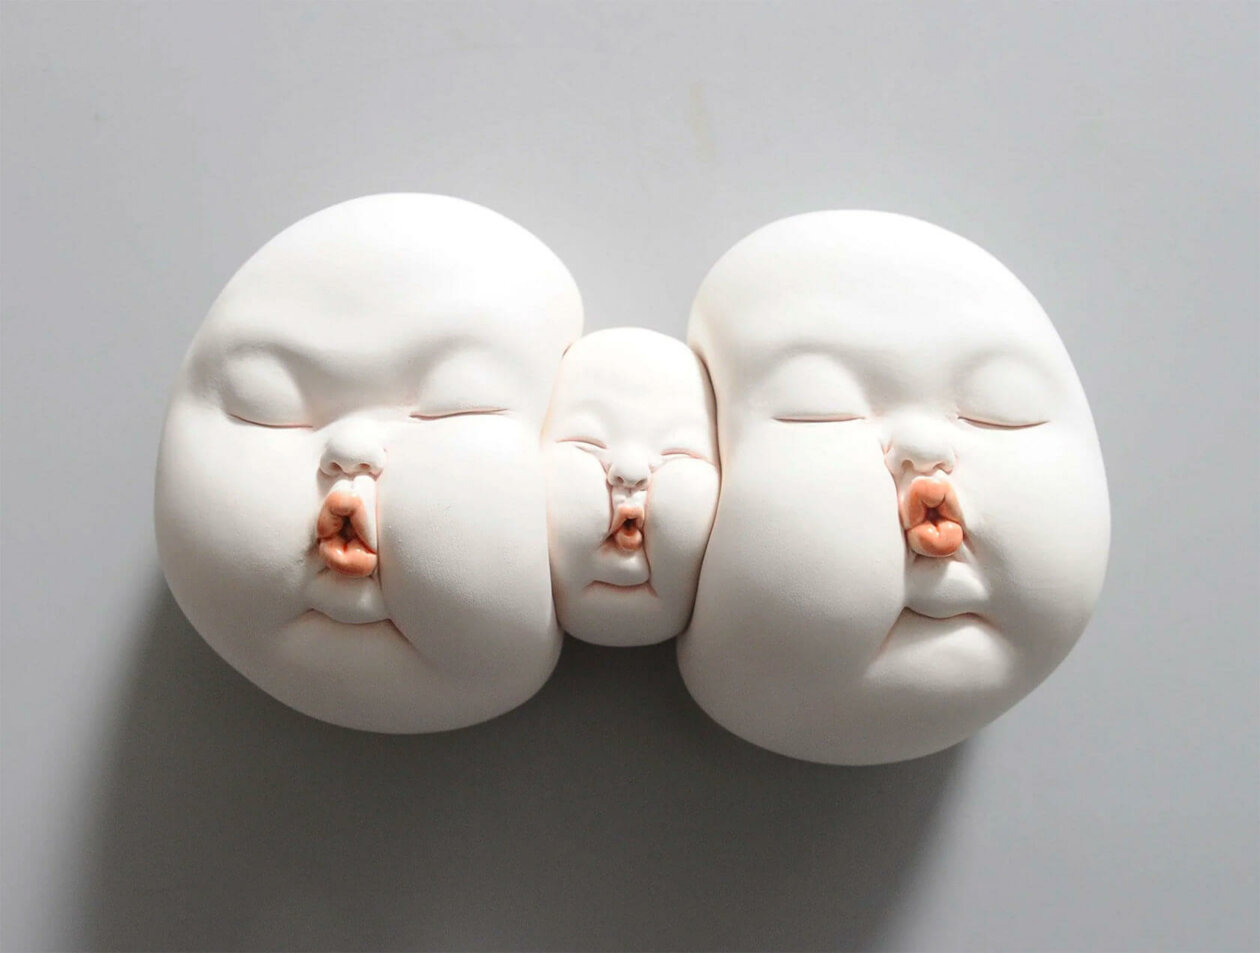 Distorted Baby Faces, Surreal Ceramic Sculptures By Johnson Tsang (14)